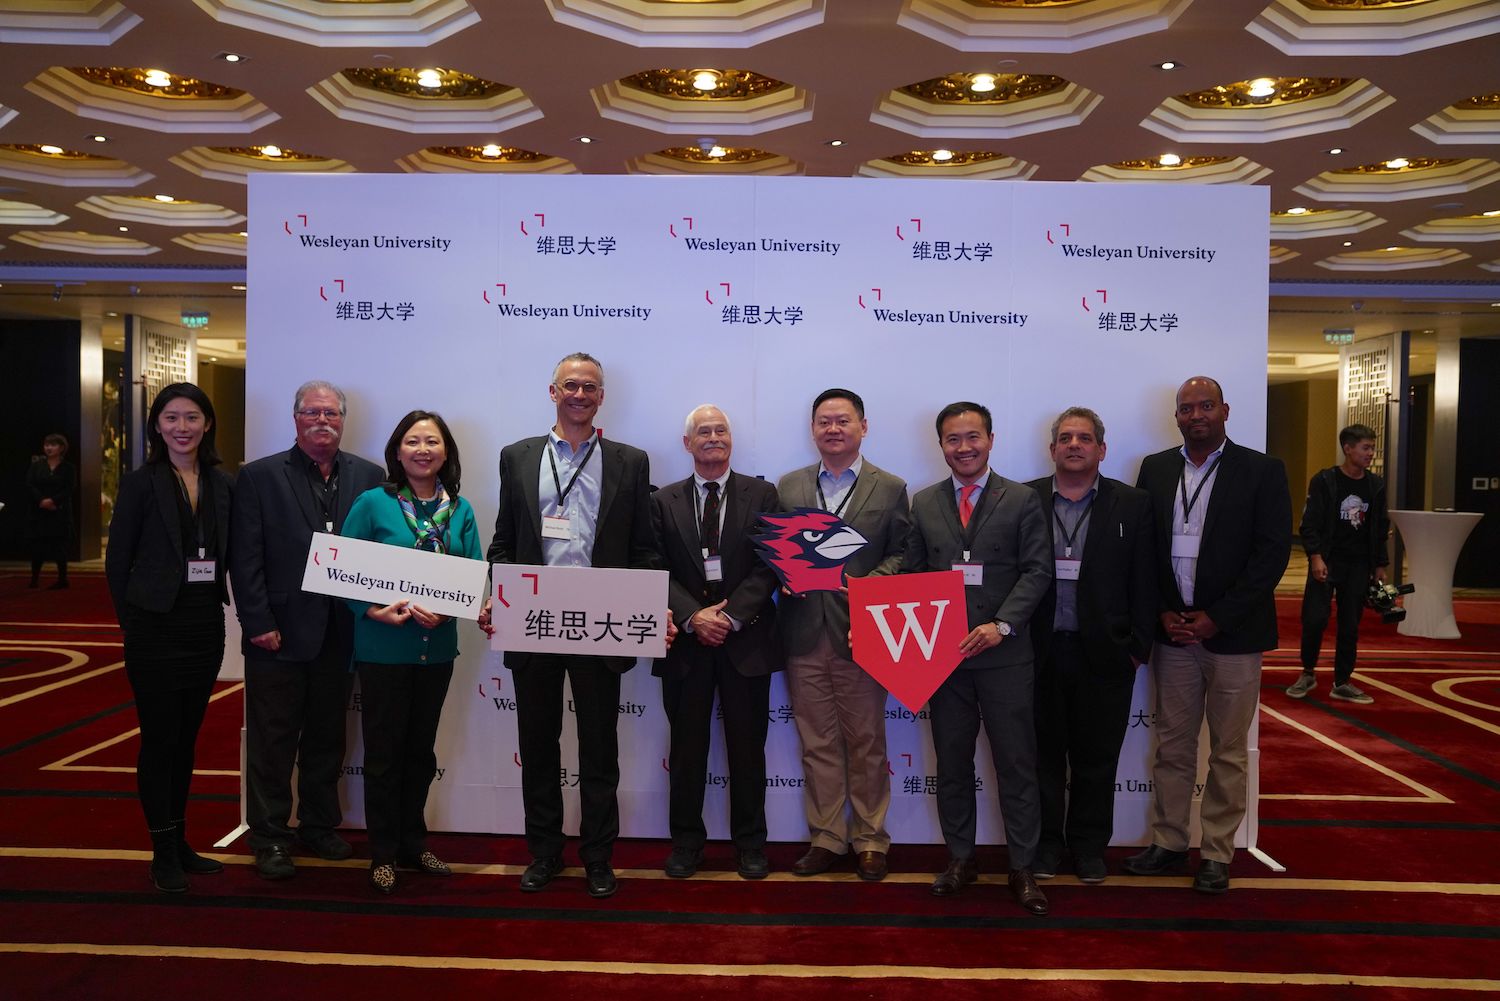 From left, Program Manager for Global Initiatives Zijia Guo, Chernoff, Zhu, Roth, Adelstein, Xie, Ai, Plafker, Vice President for Advancement Frantz Williams at the forum.